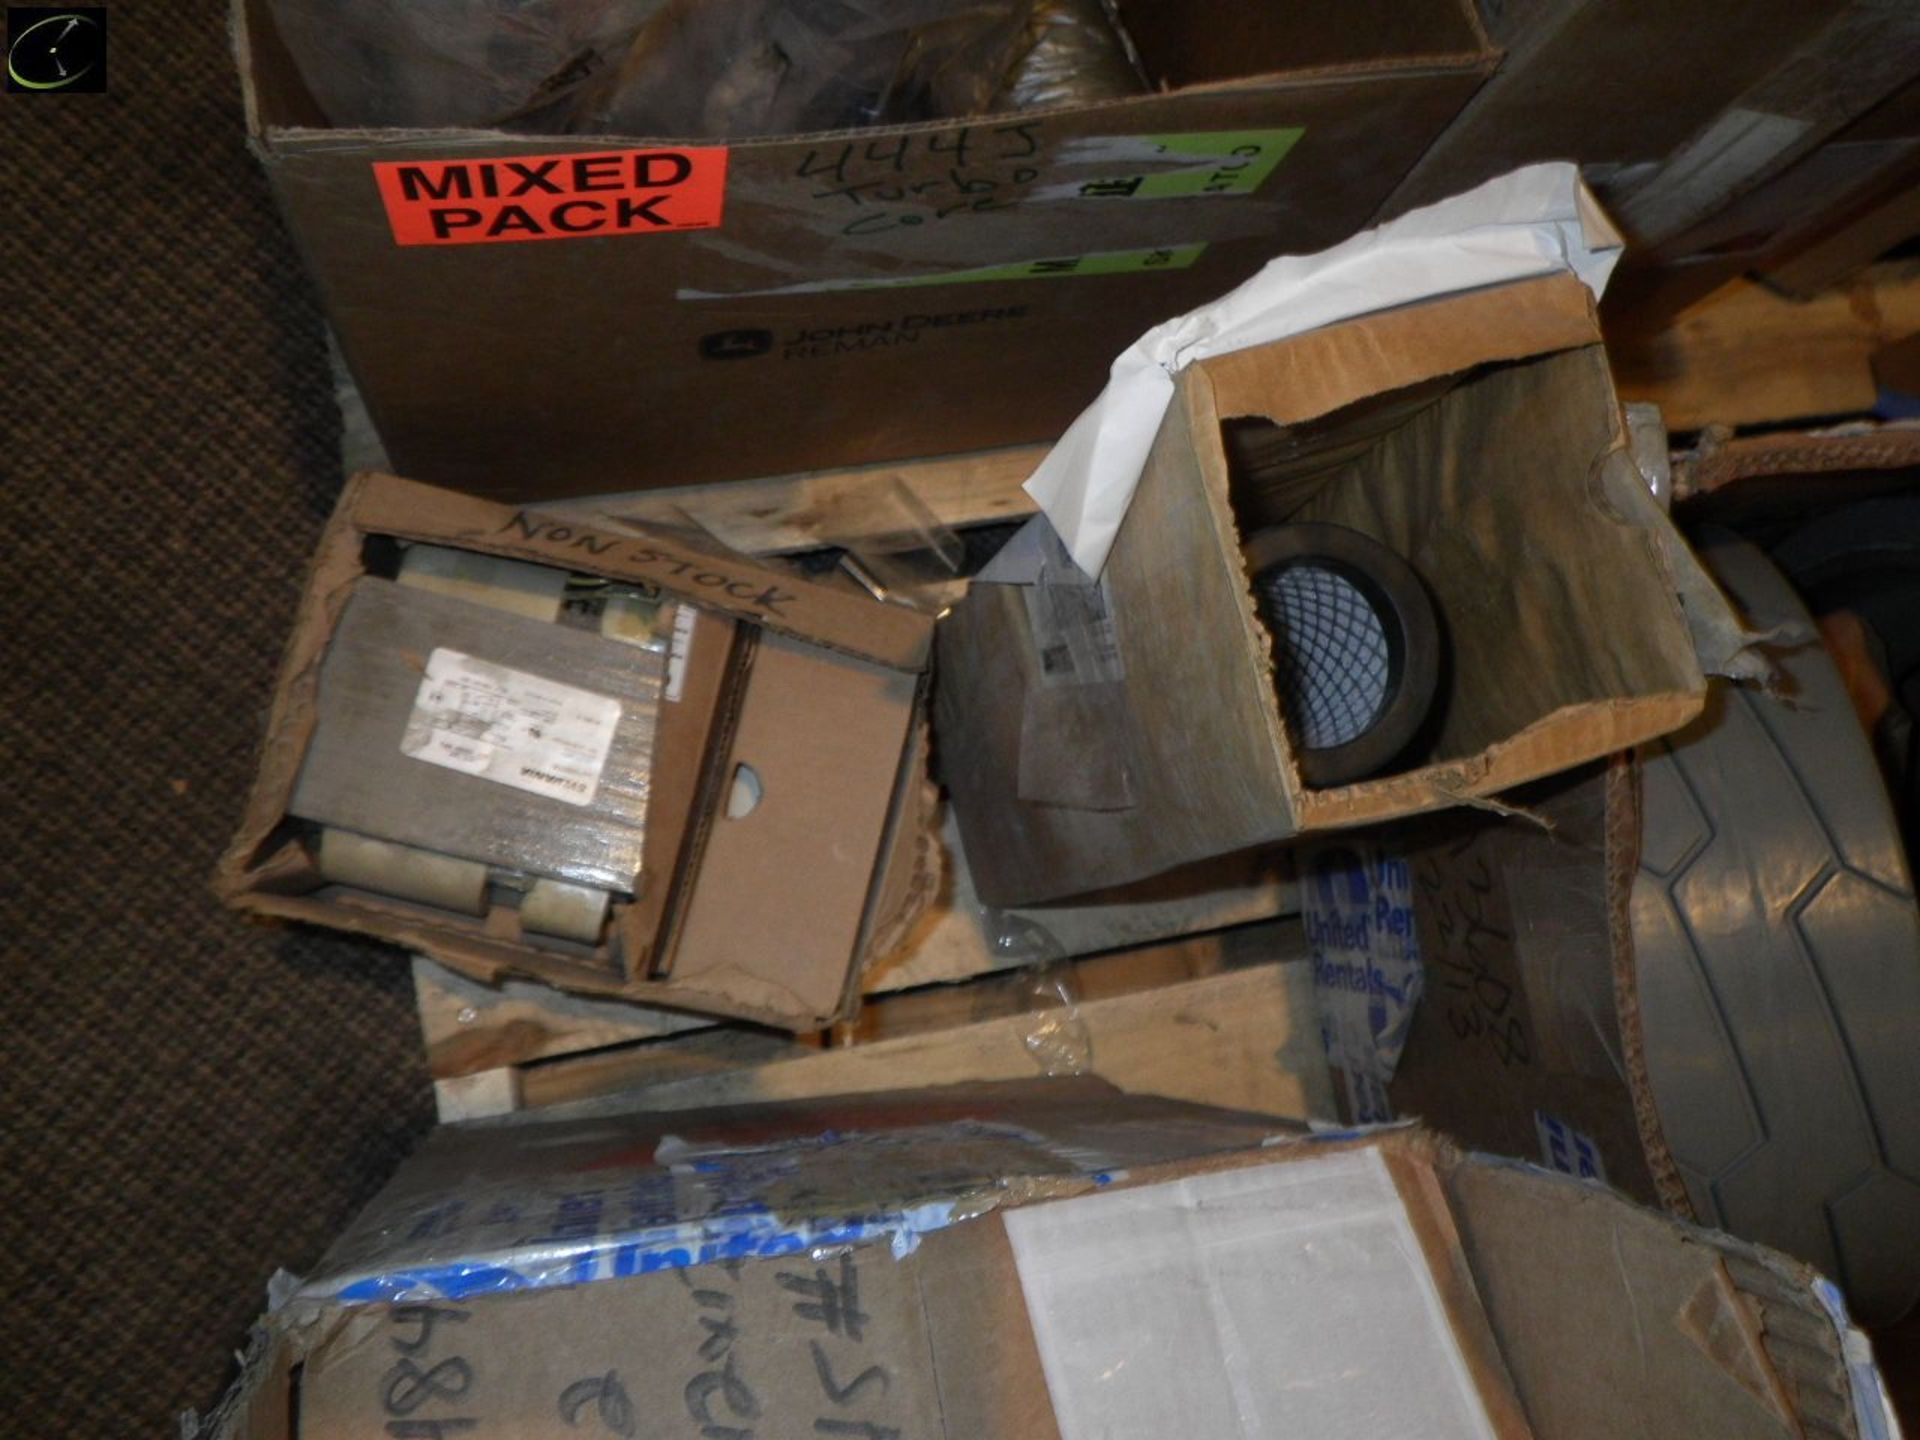 Pallet Of TWO Boxes Of TWO Solid Rubber Forklift Wheels, Used Turbo, Filters Etc. - Image 6 of 7